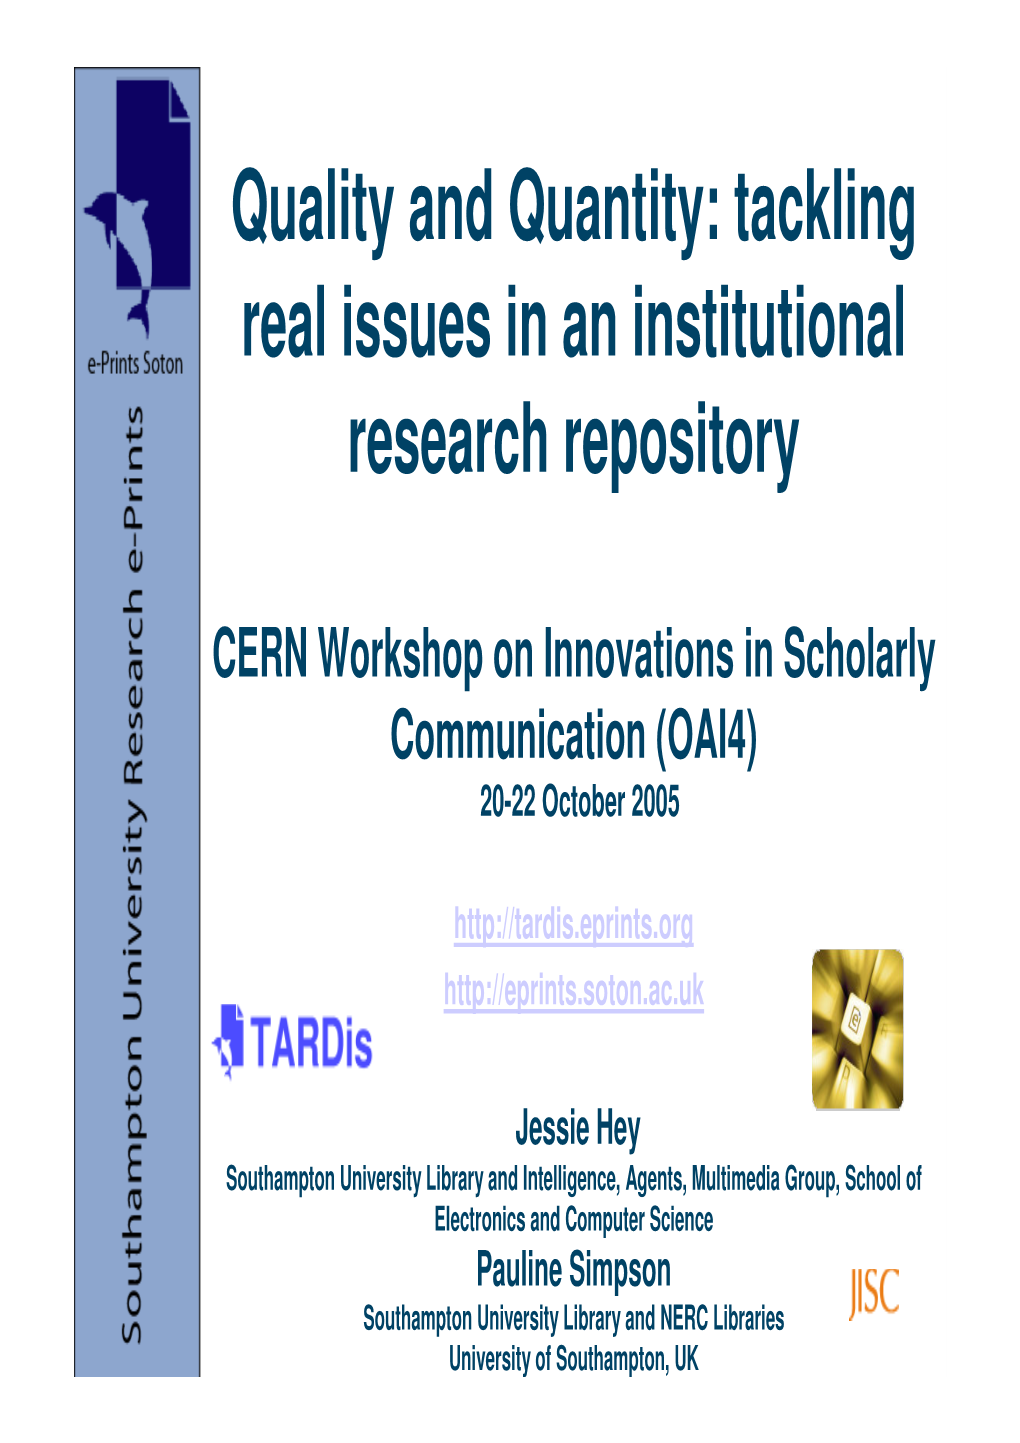 Tackling Real Issues in an Institutional Research Repository